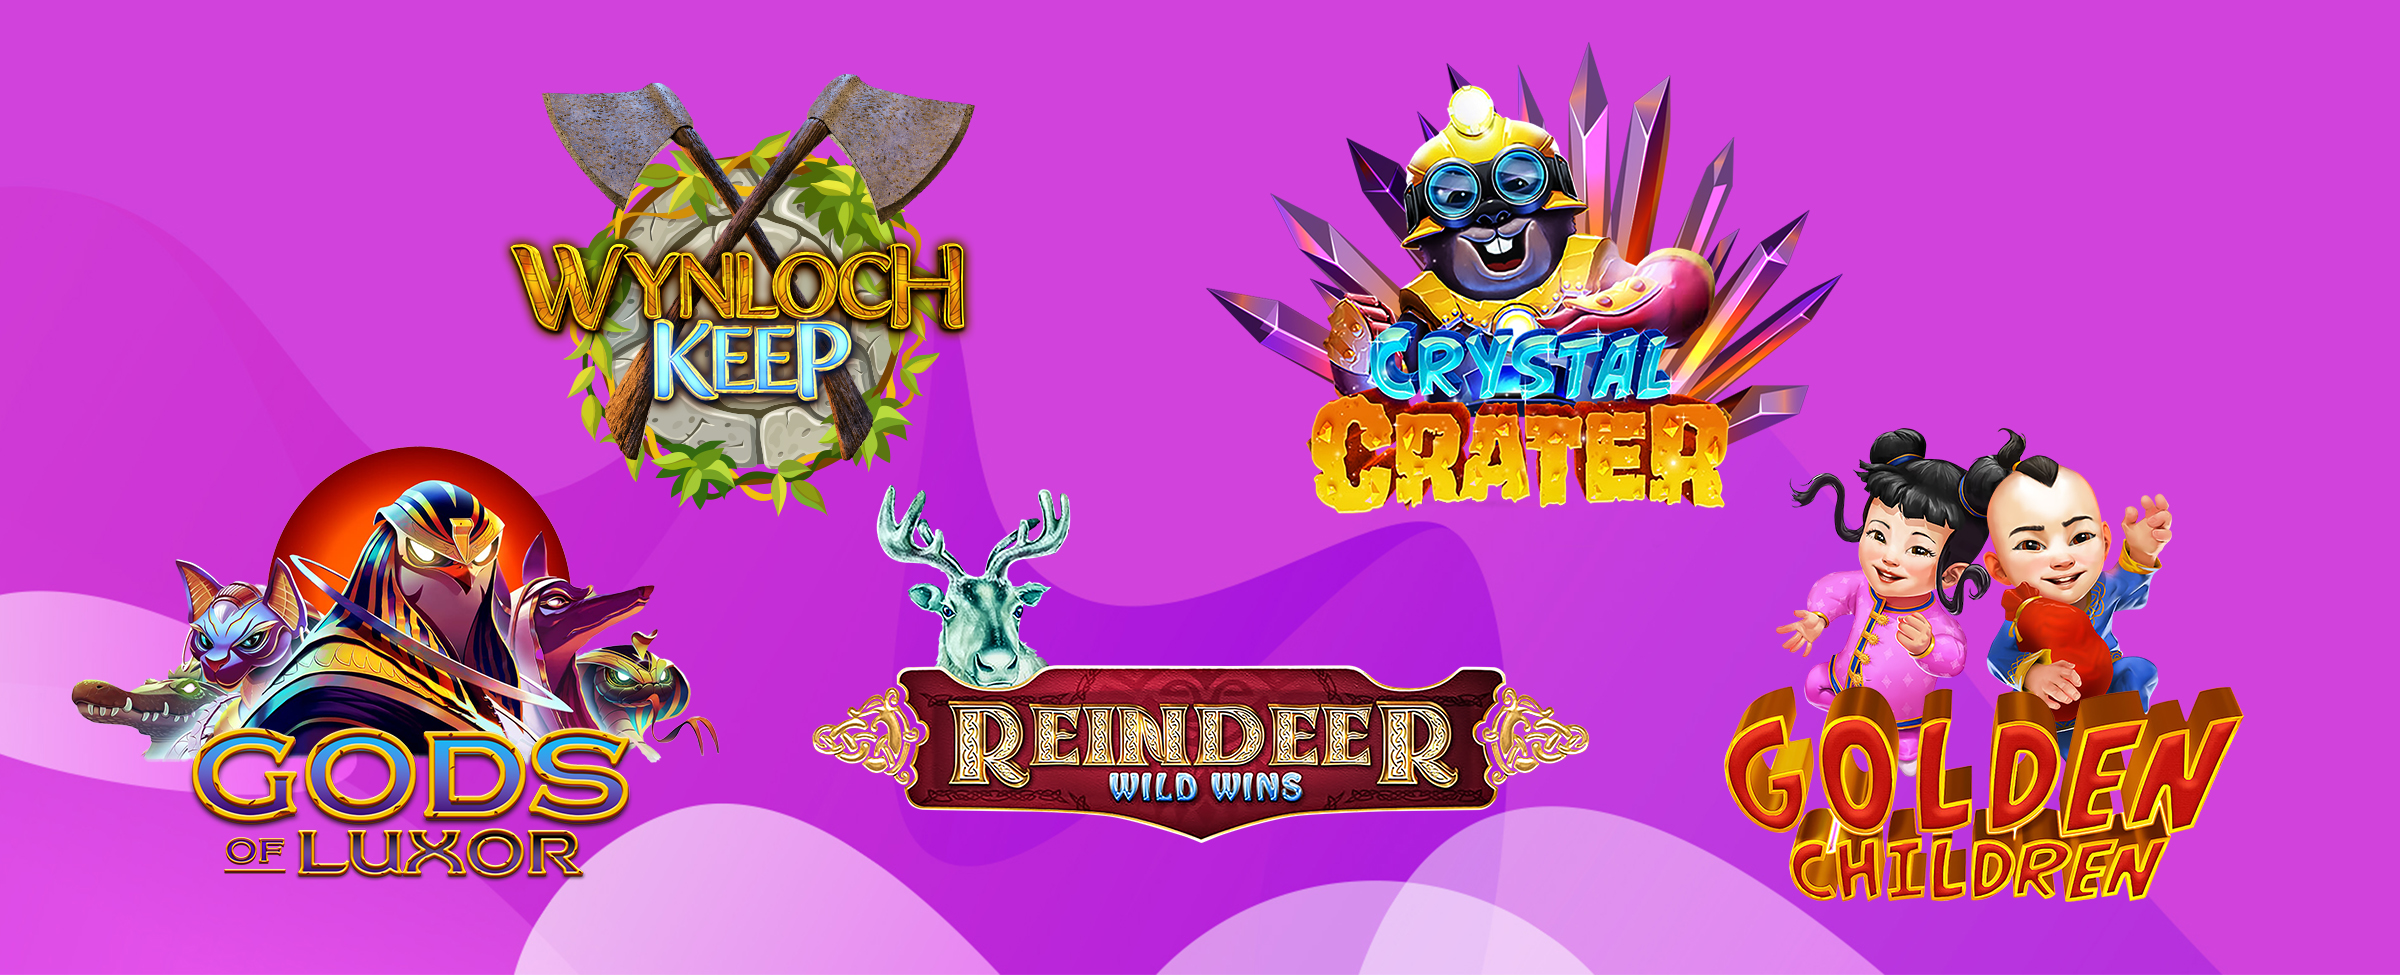 Let's explore top slots such as Crystal Crater, Golden Children, Reindeer Wild Wins and more.